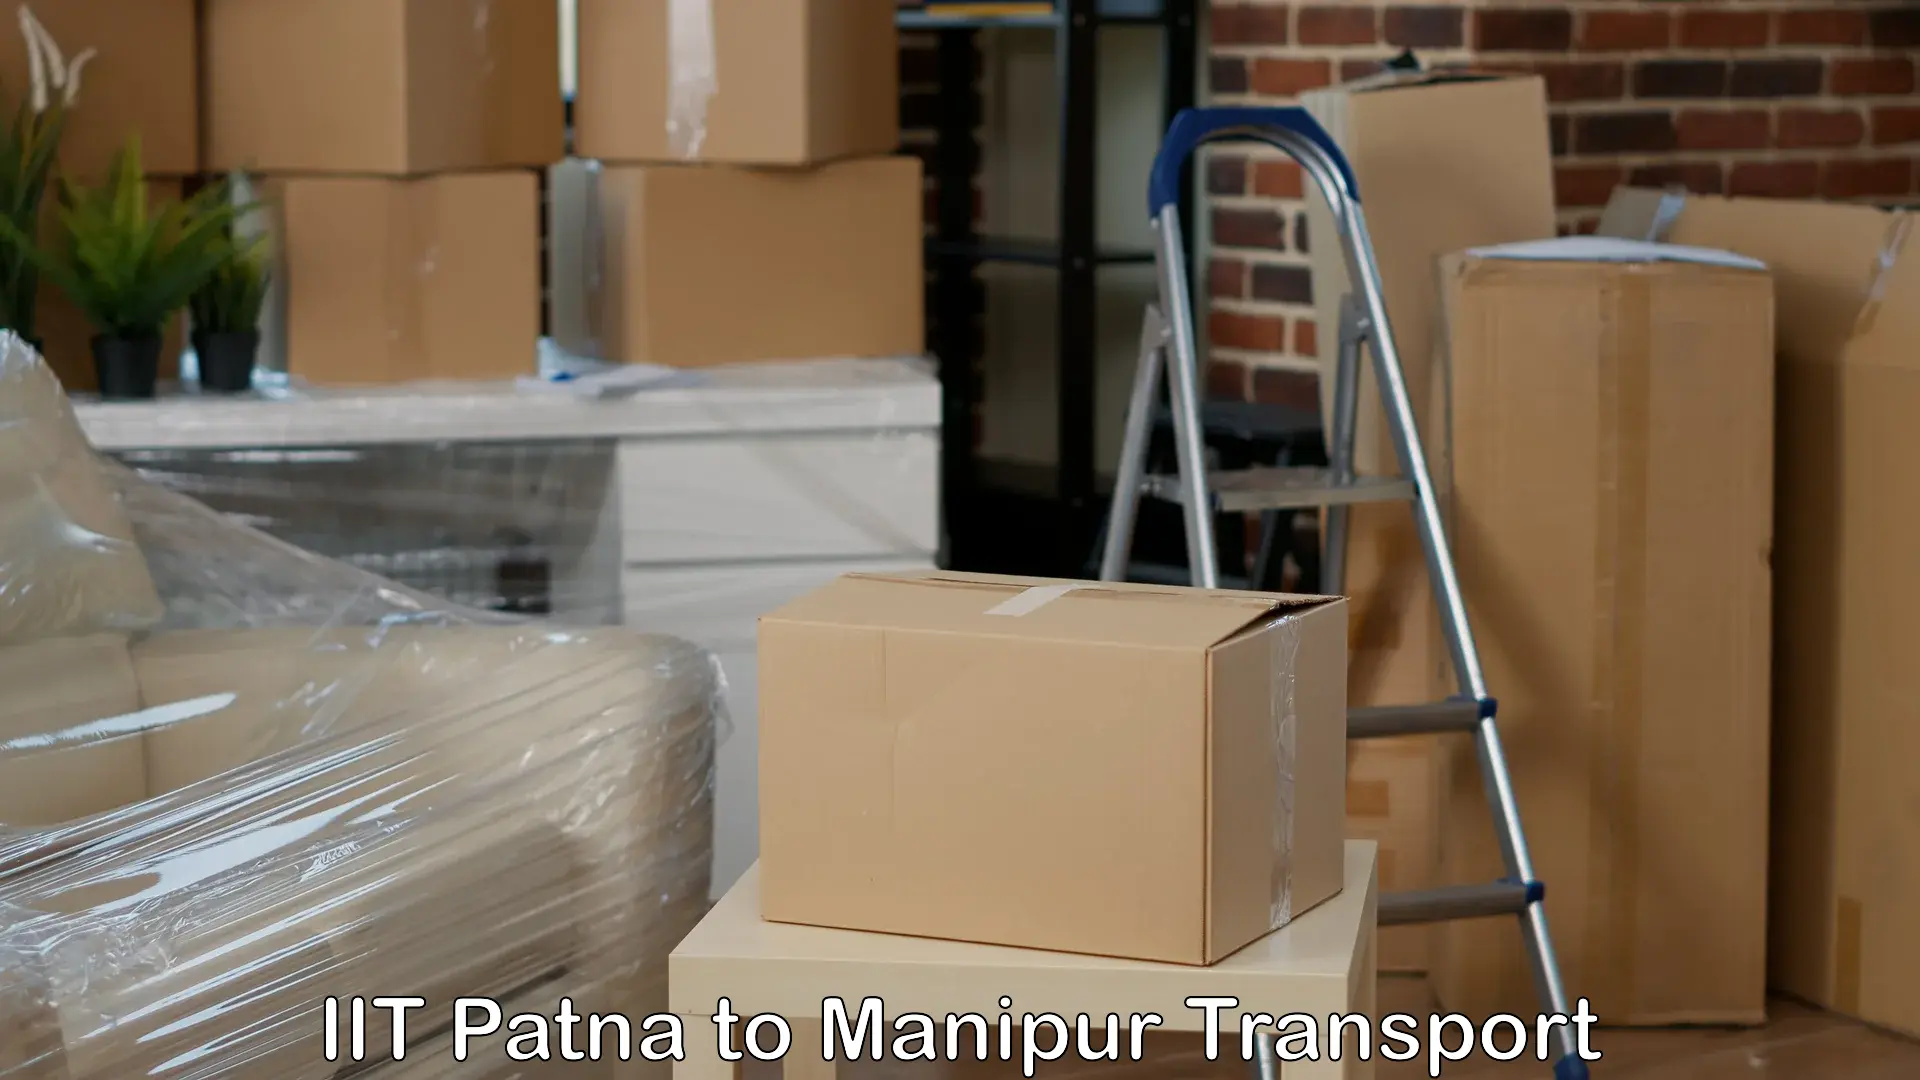 Transport bike from one state to another IIT Patna to NIT Manipur